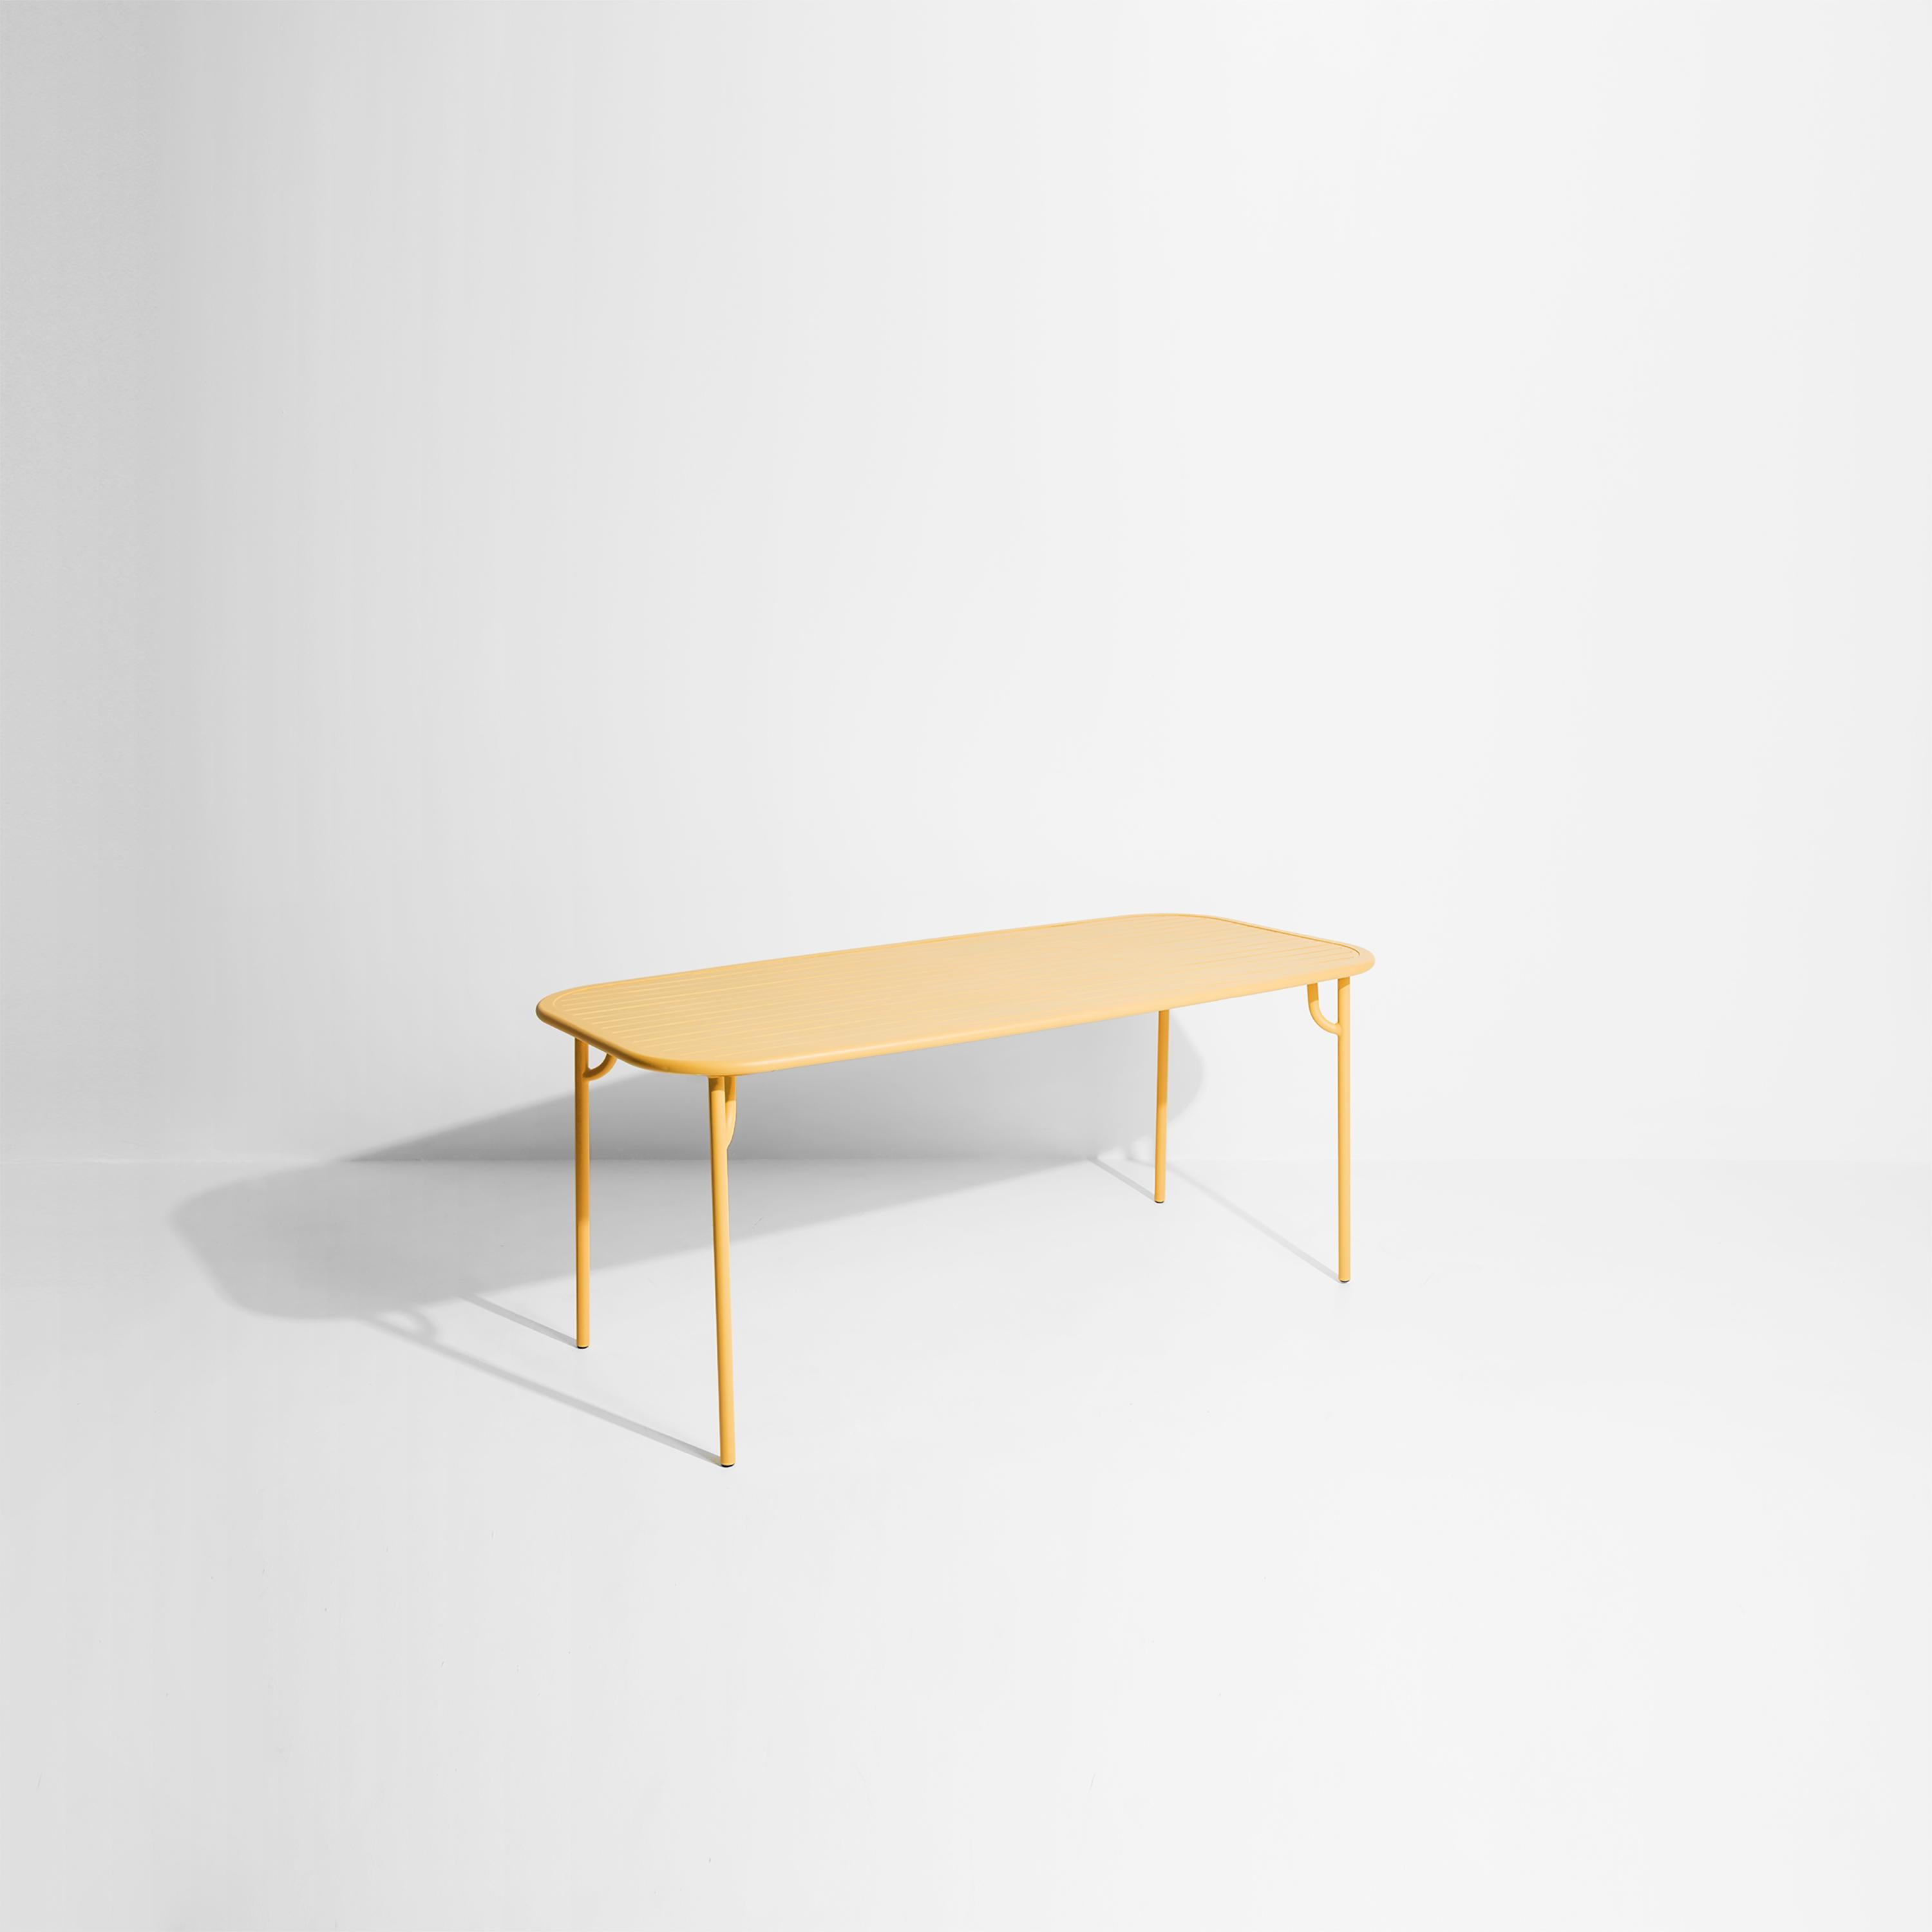 Petite Friture Week-End Medium Rectangular Dining Table in Saffron Aluminium with Slats by Studio BrichetZiegler, 2017

The week-end collection is a full range of outdoor furniture, in aluminium grained epoxy paint, matt finish, that includes 18